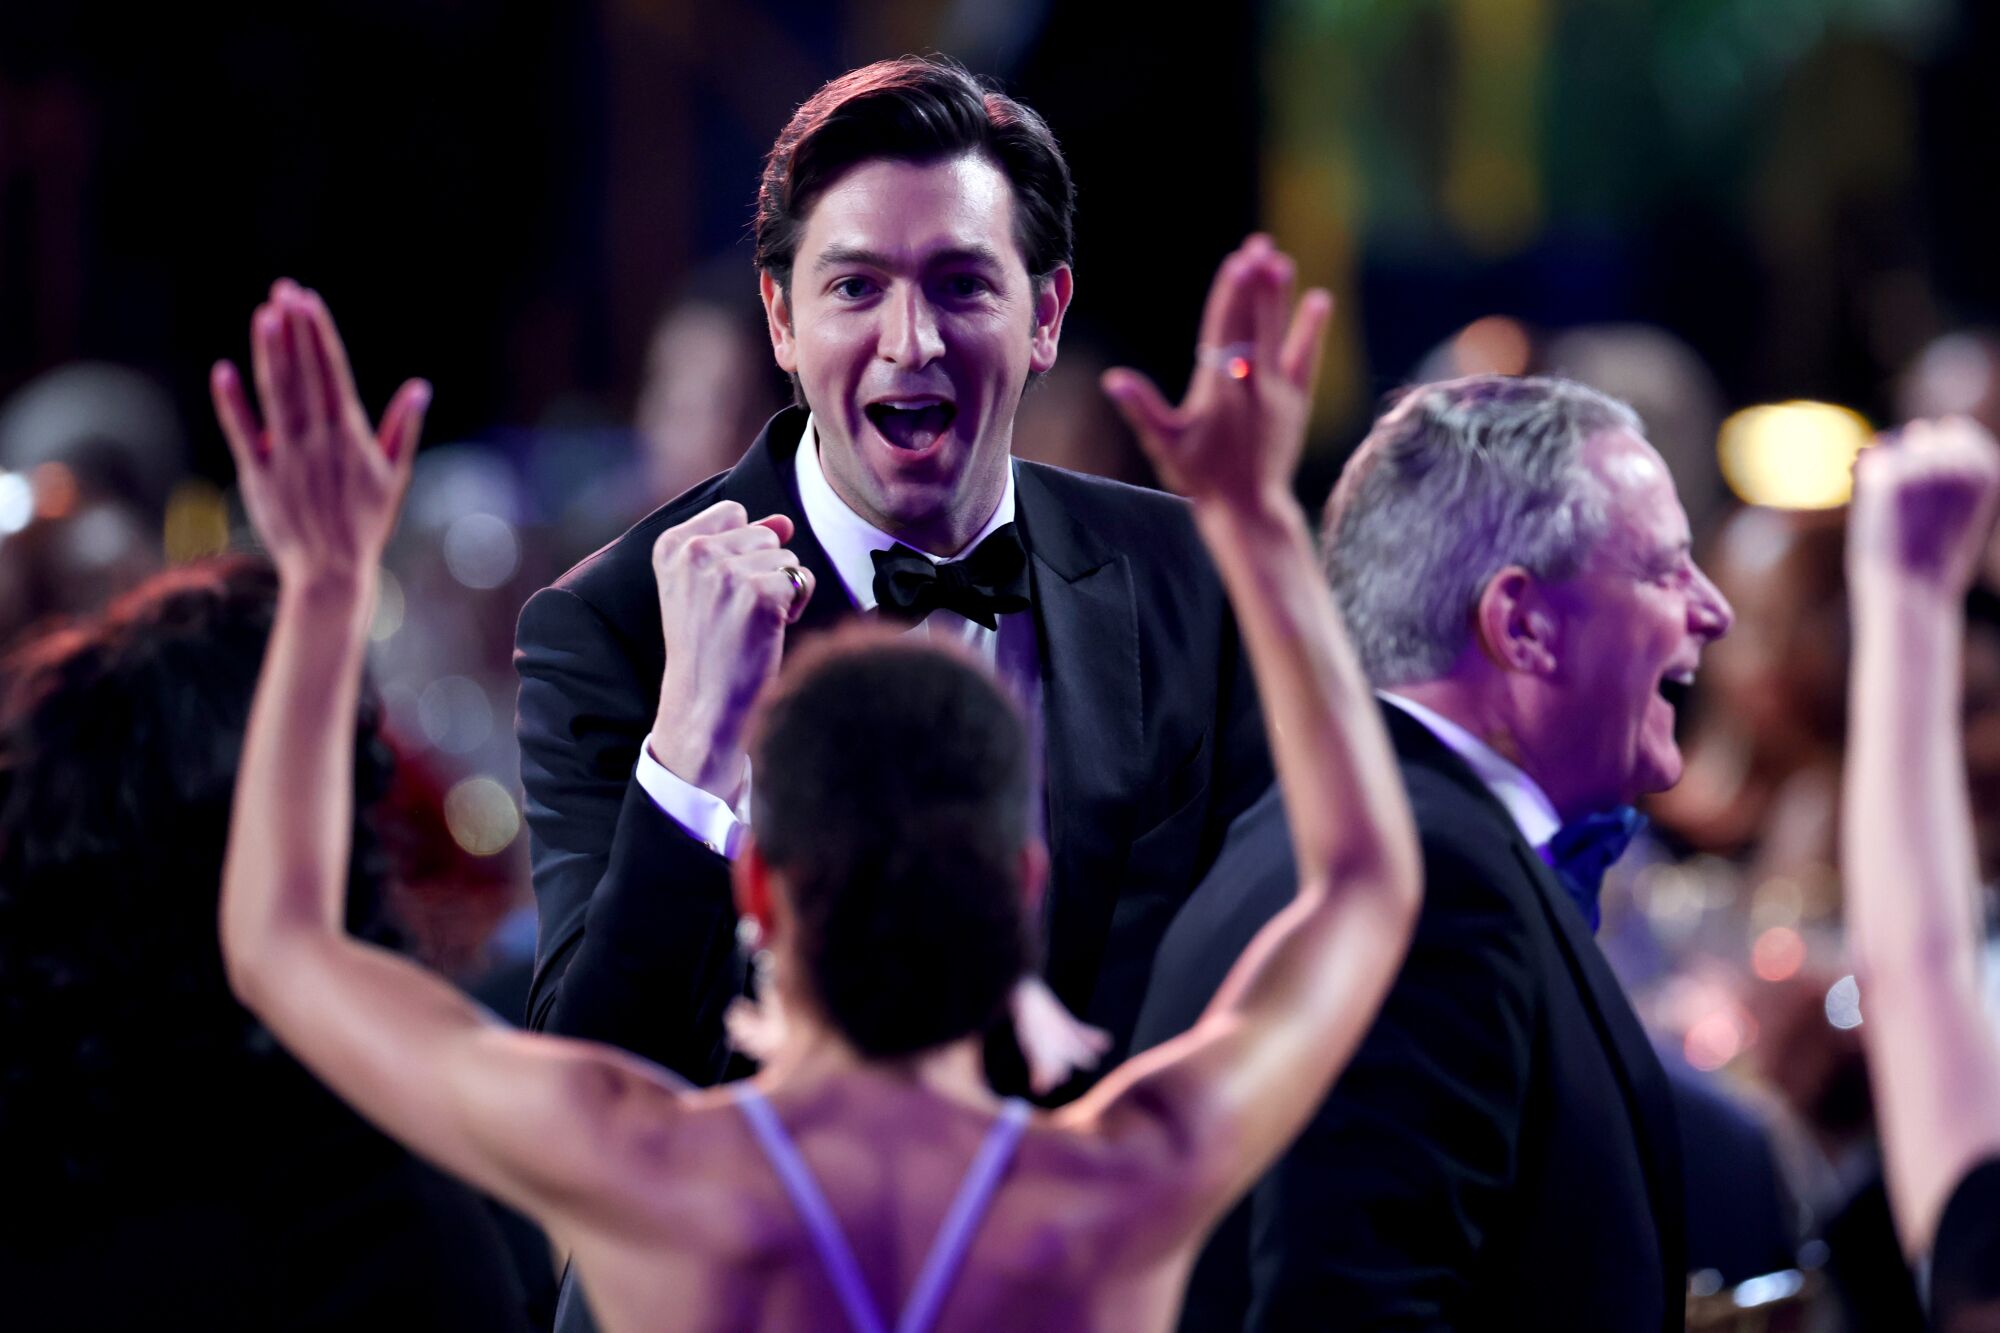 Nicholas Braun reacts after winning the award for Ensemble in a Drama Series for “Succession” 